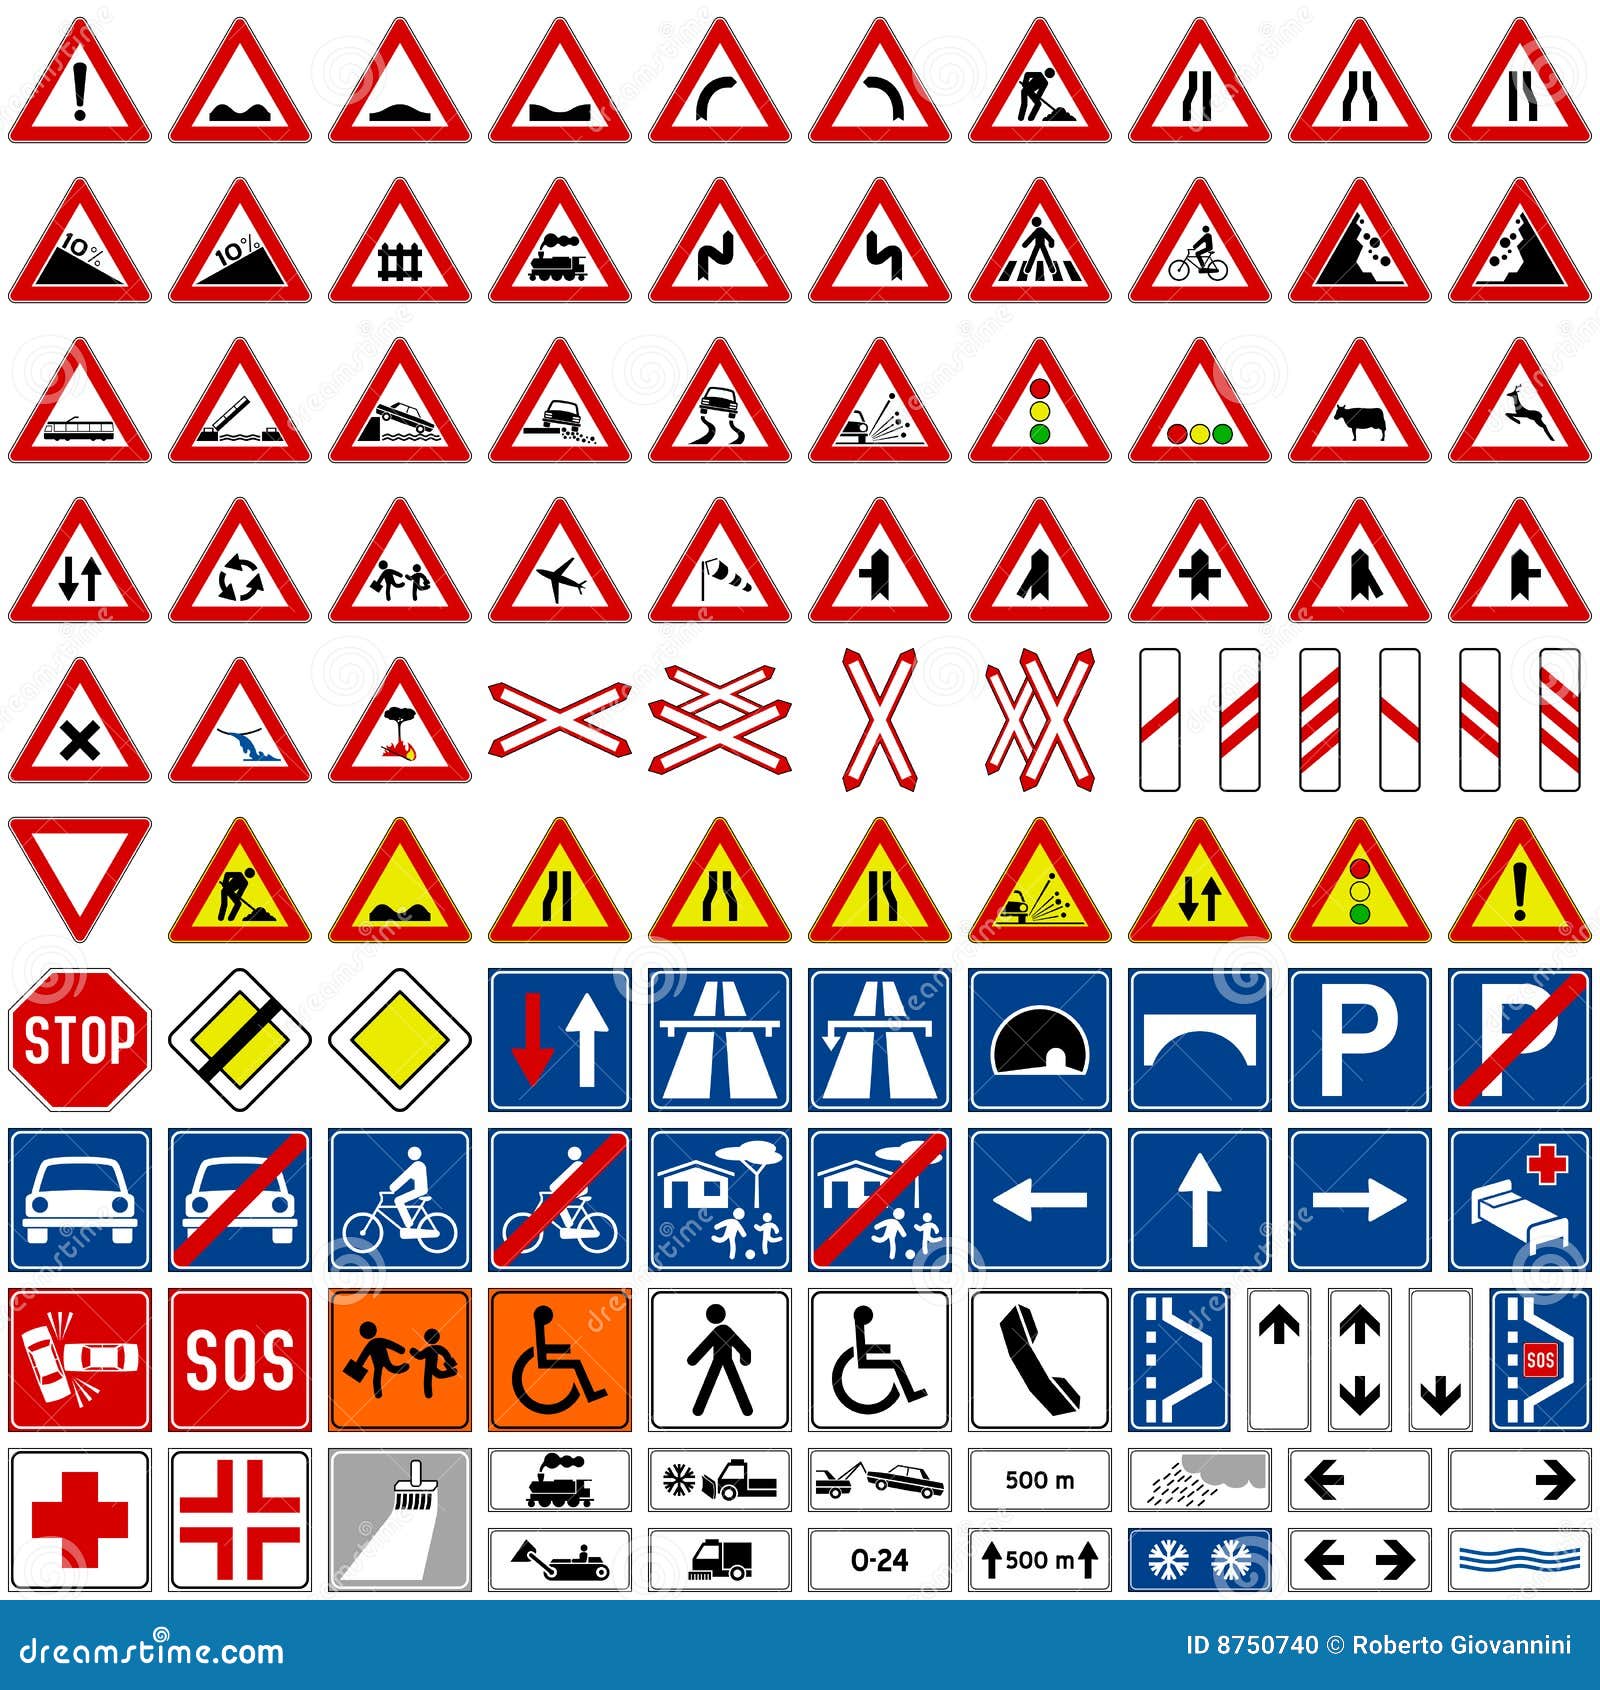 traffic signs collection [1]